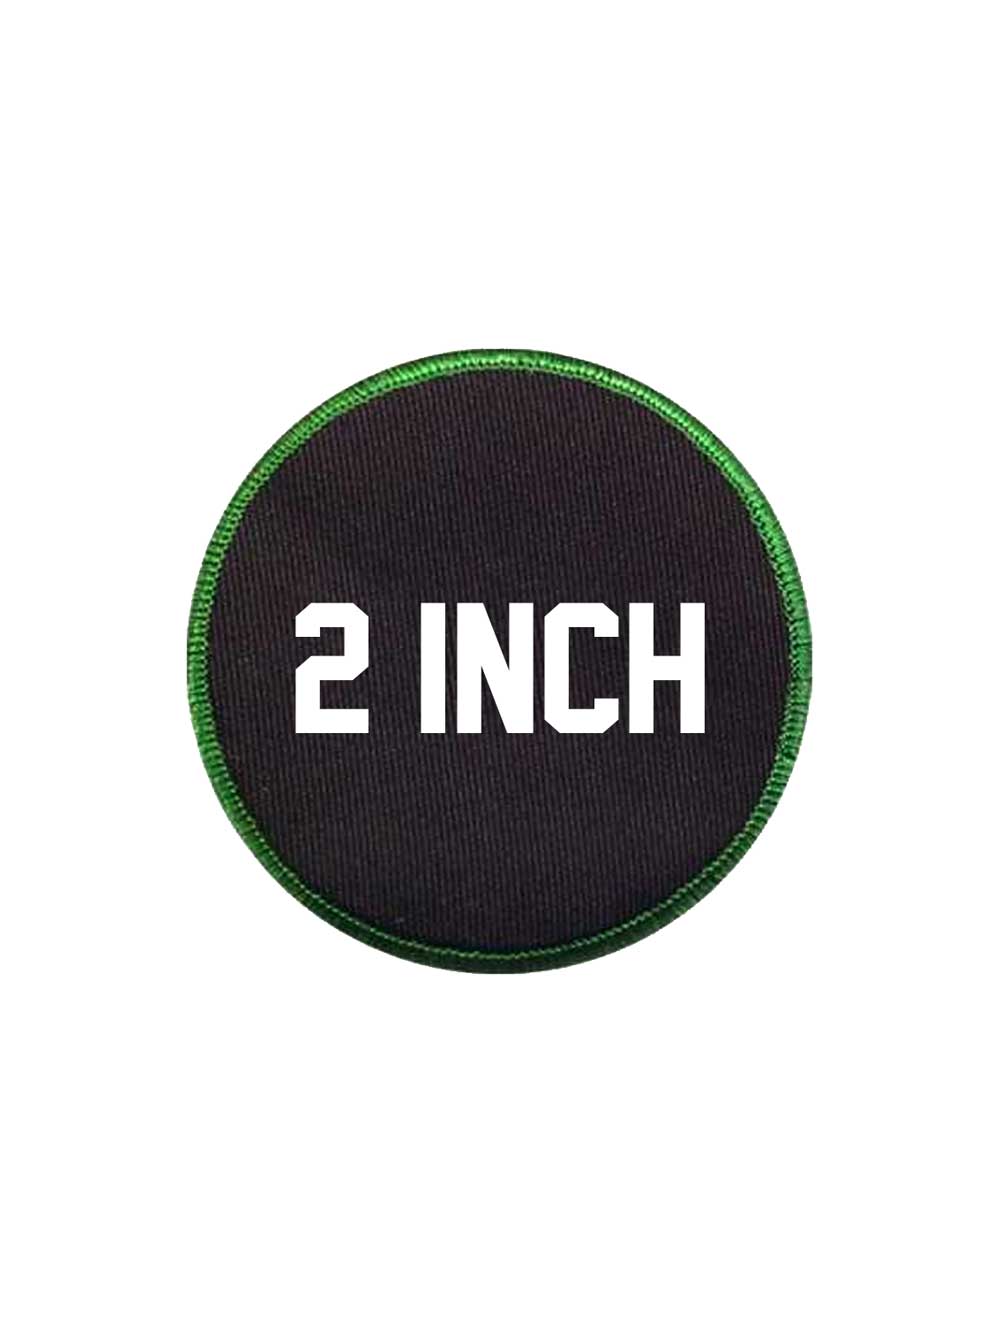 Embroidered Patches - 2 Inch